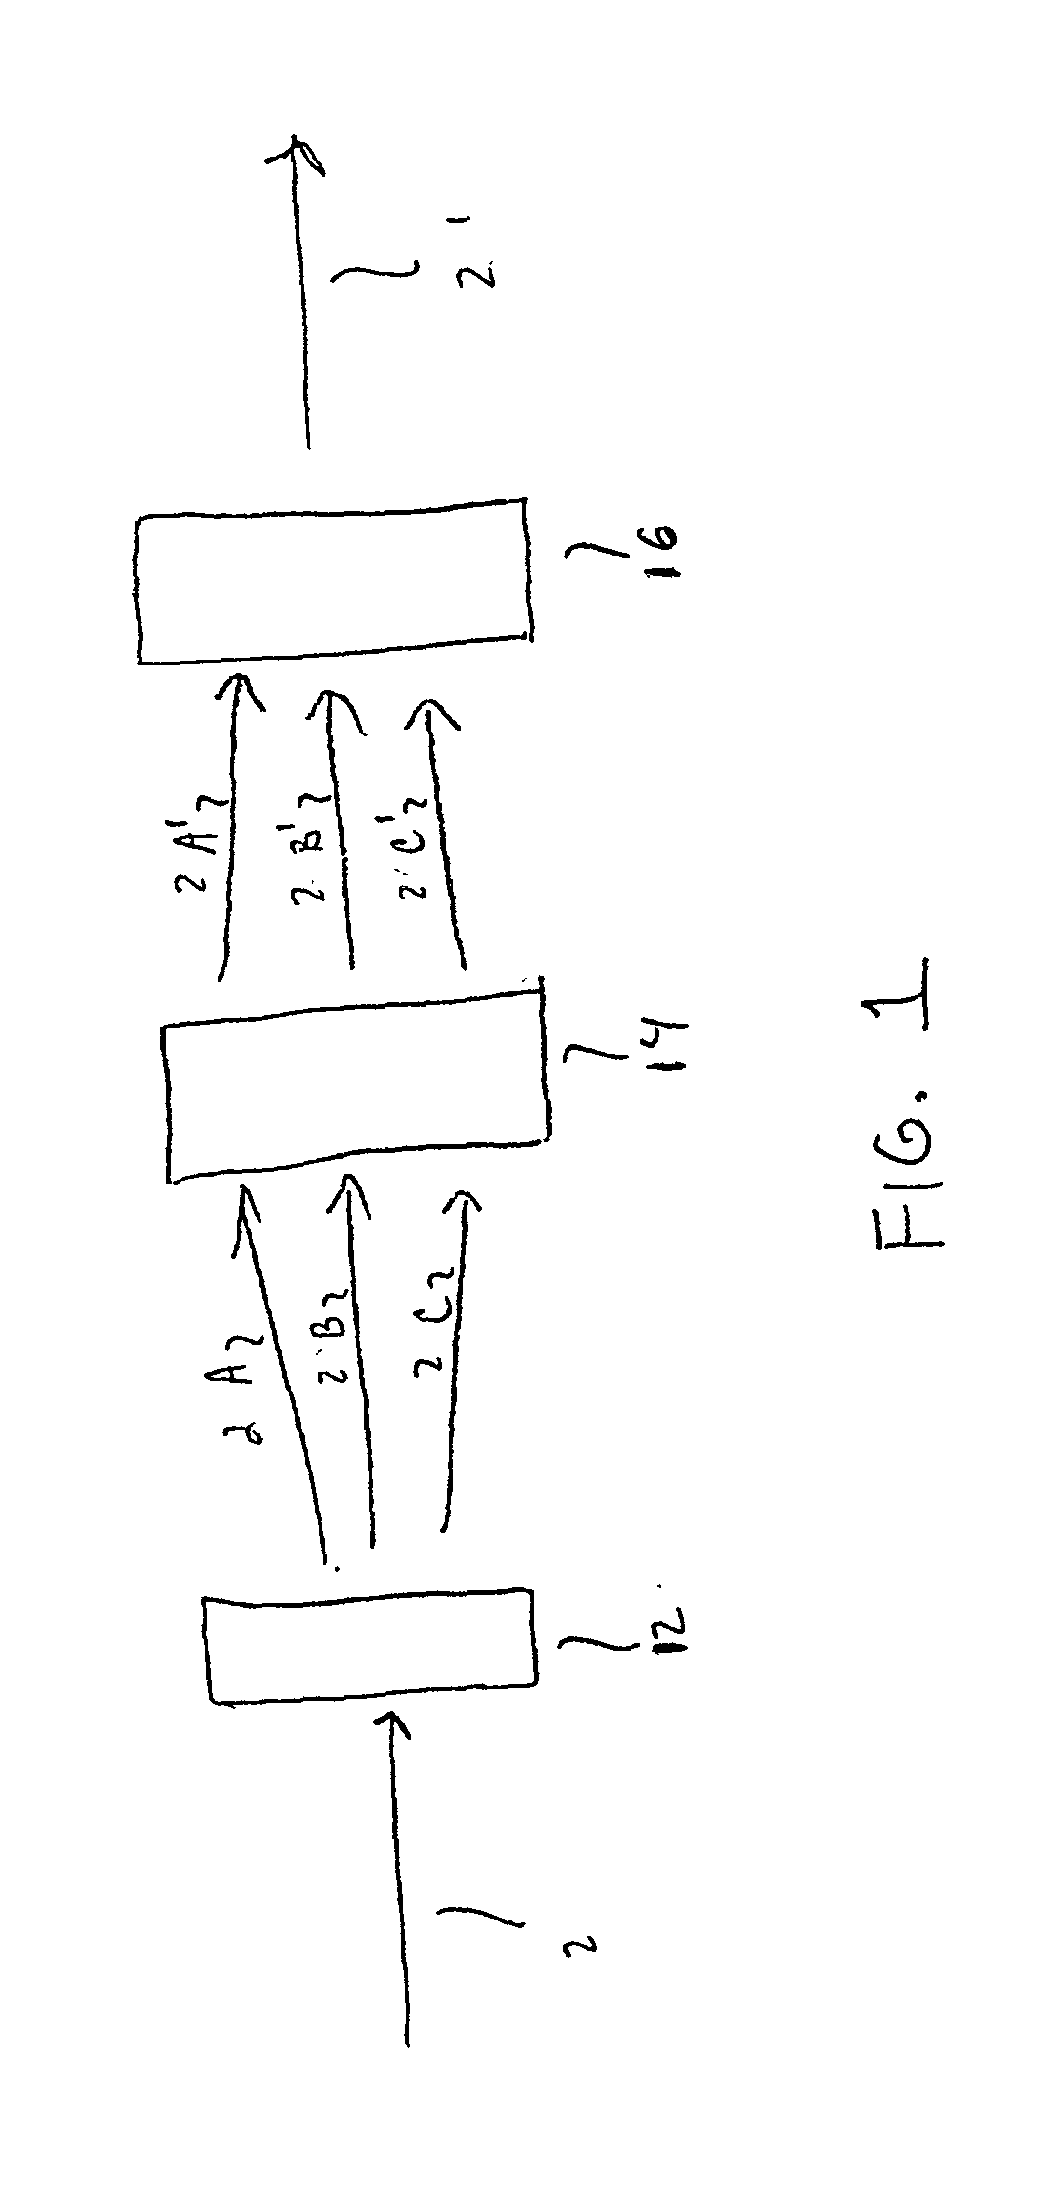 Methods and apparatus for diffractive optical processing using an actuatable structure